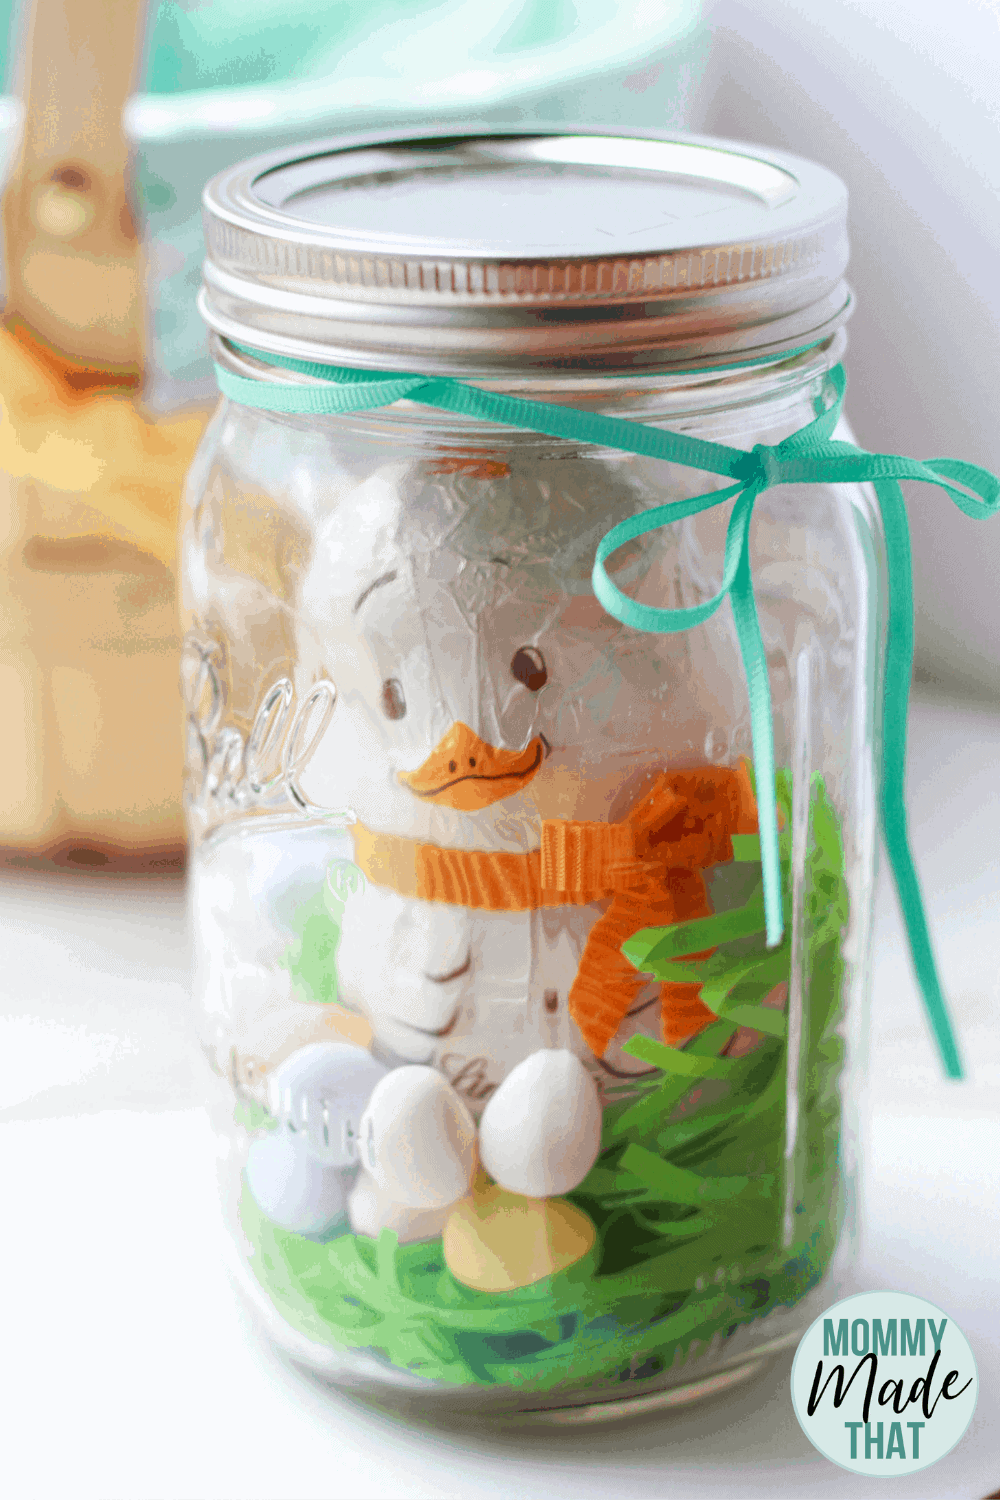 Adorable Chocolate Easter Bunny “Chick” in a Mason Jar